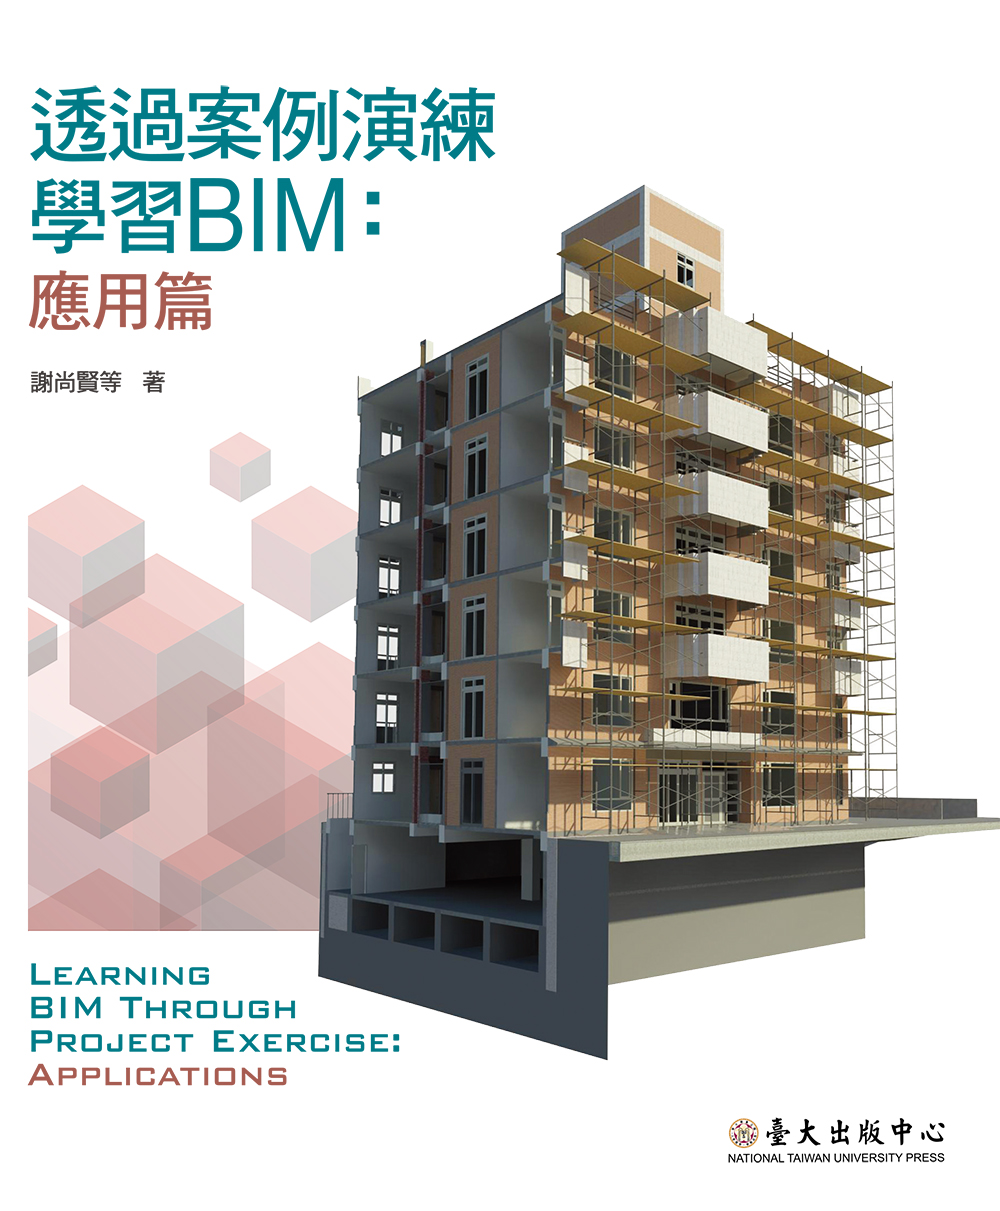 Learning BIM through Project Exercise: Applications